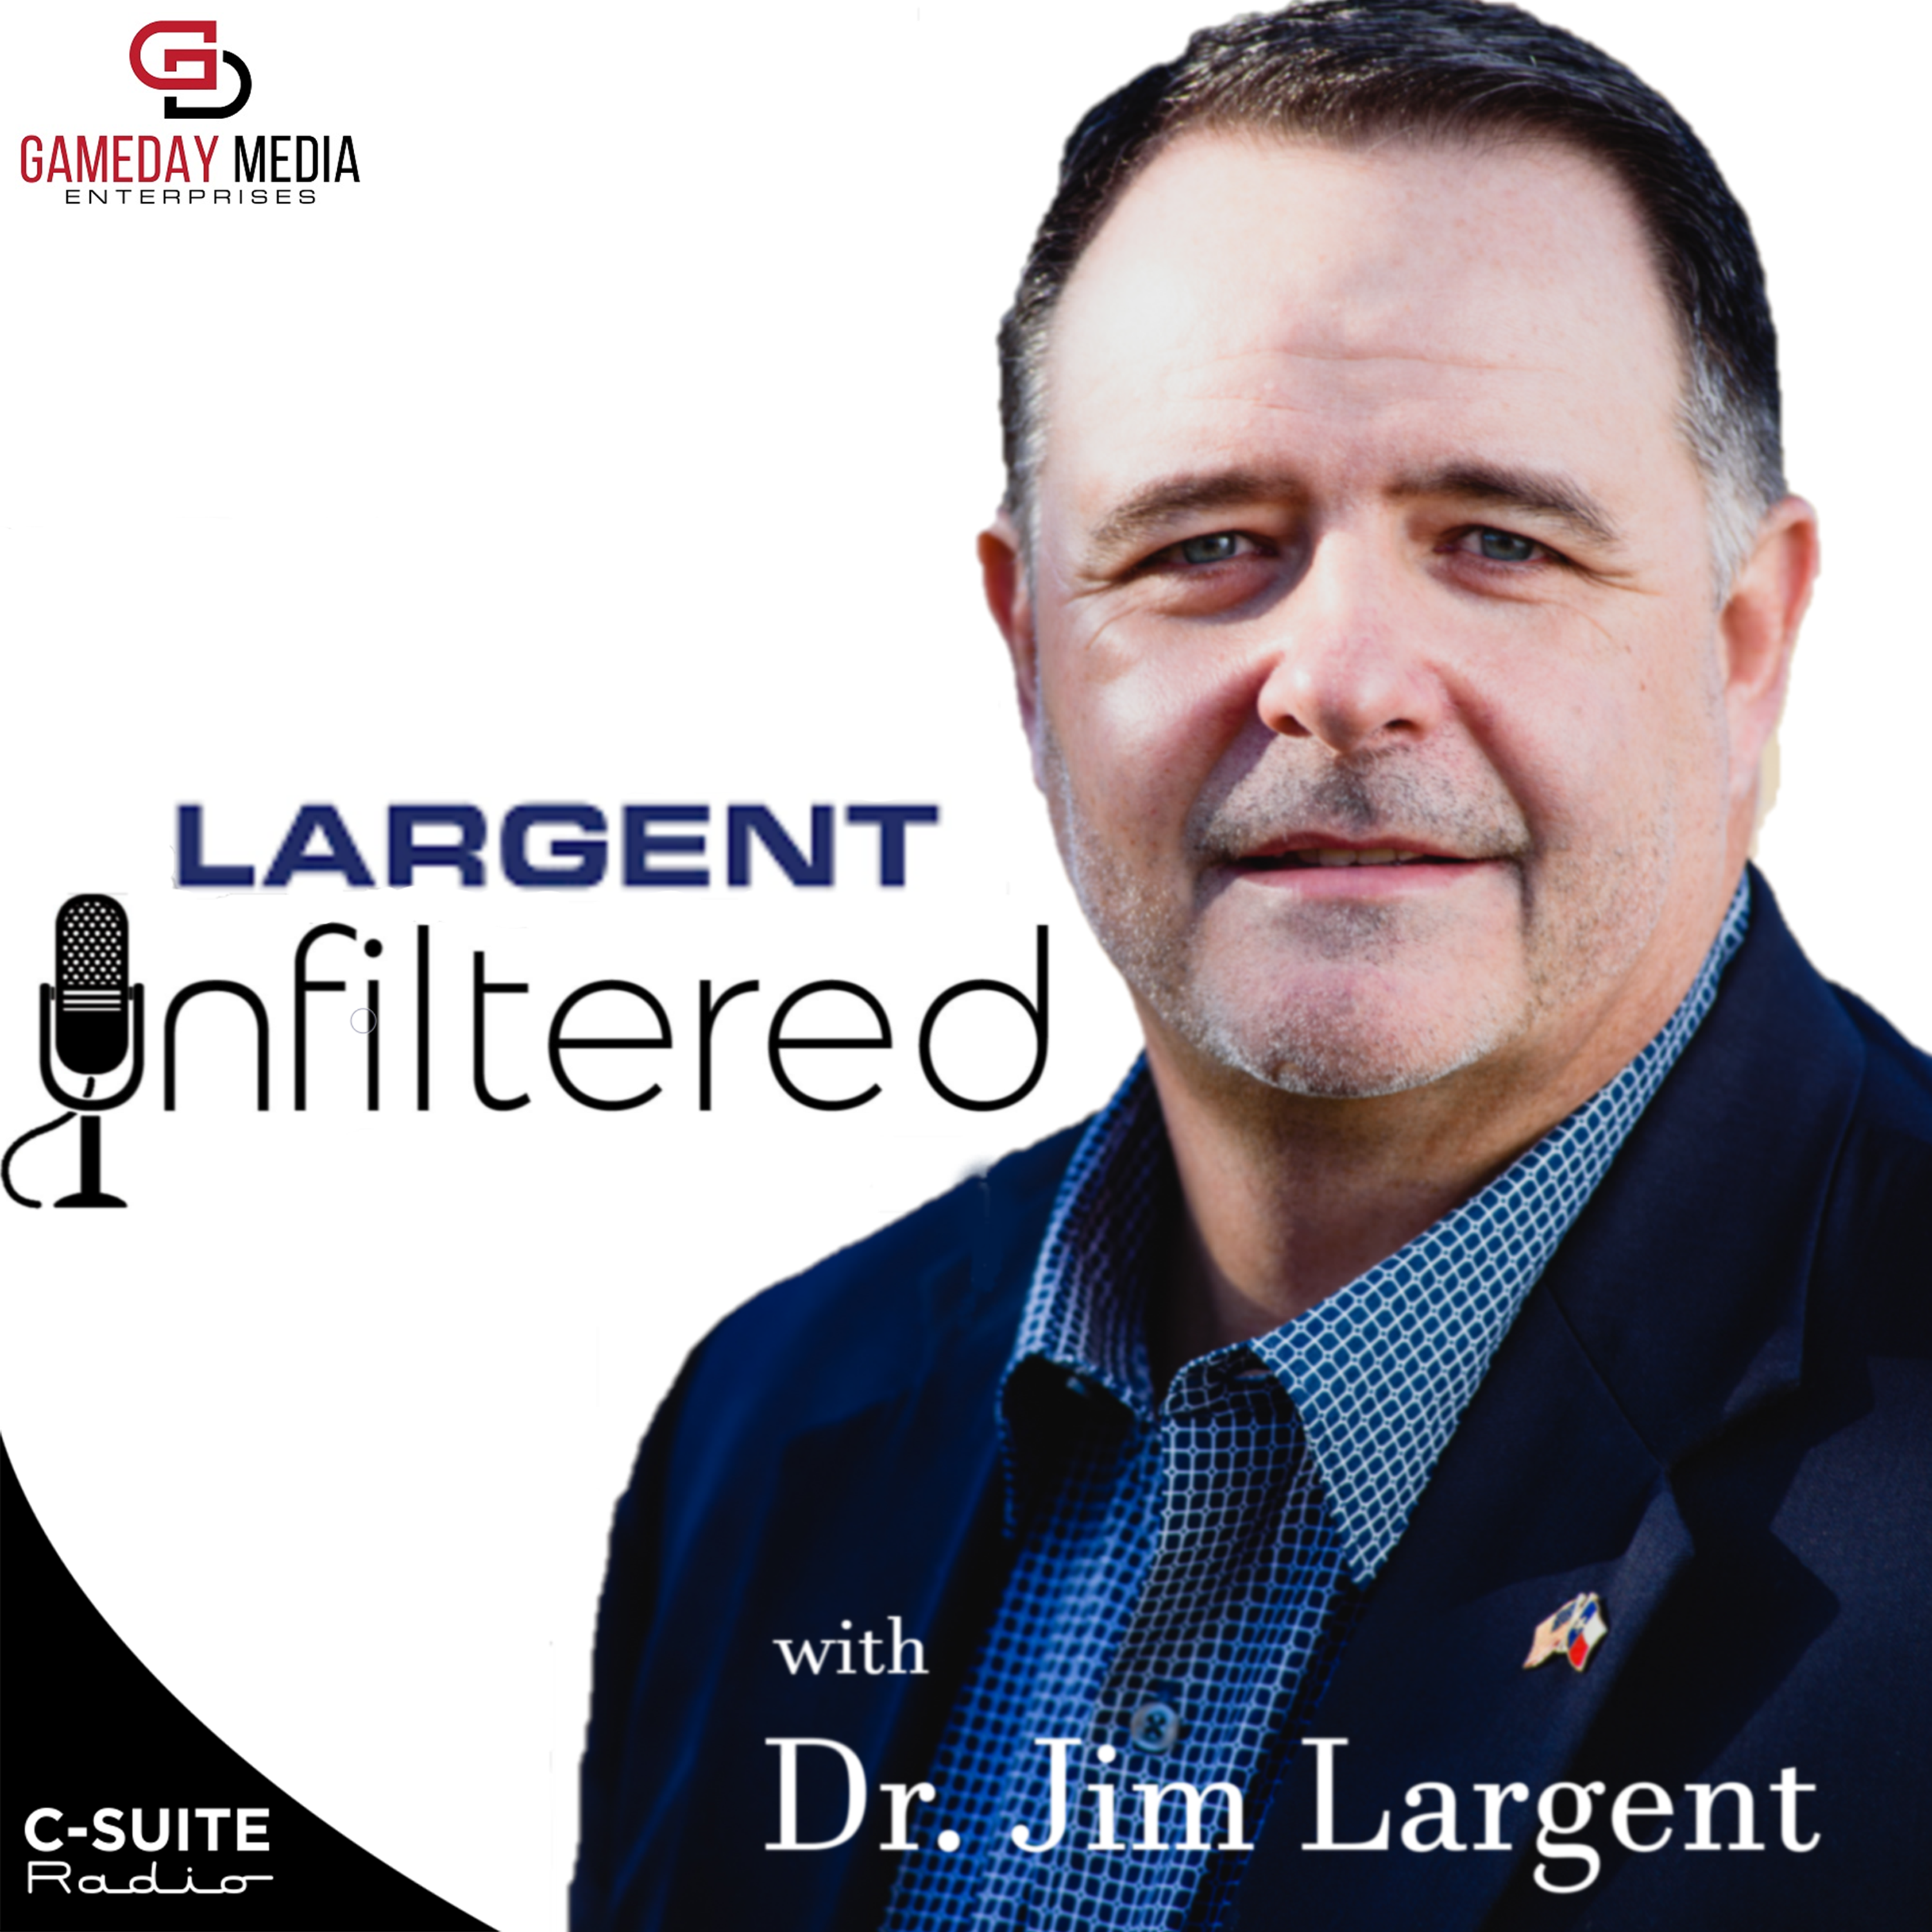 Largent Unfiltered